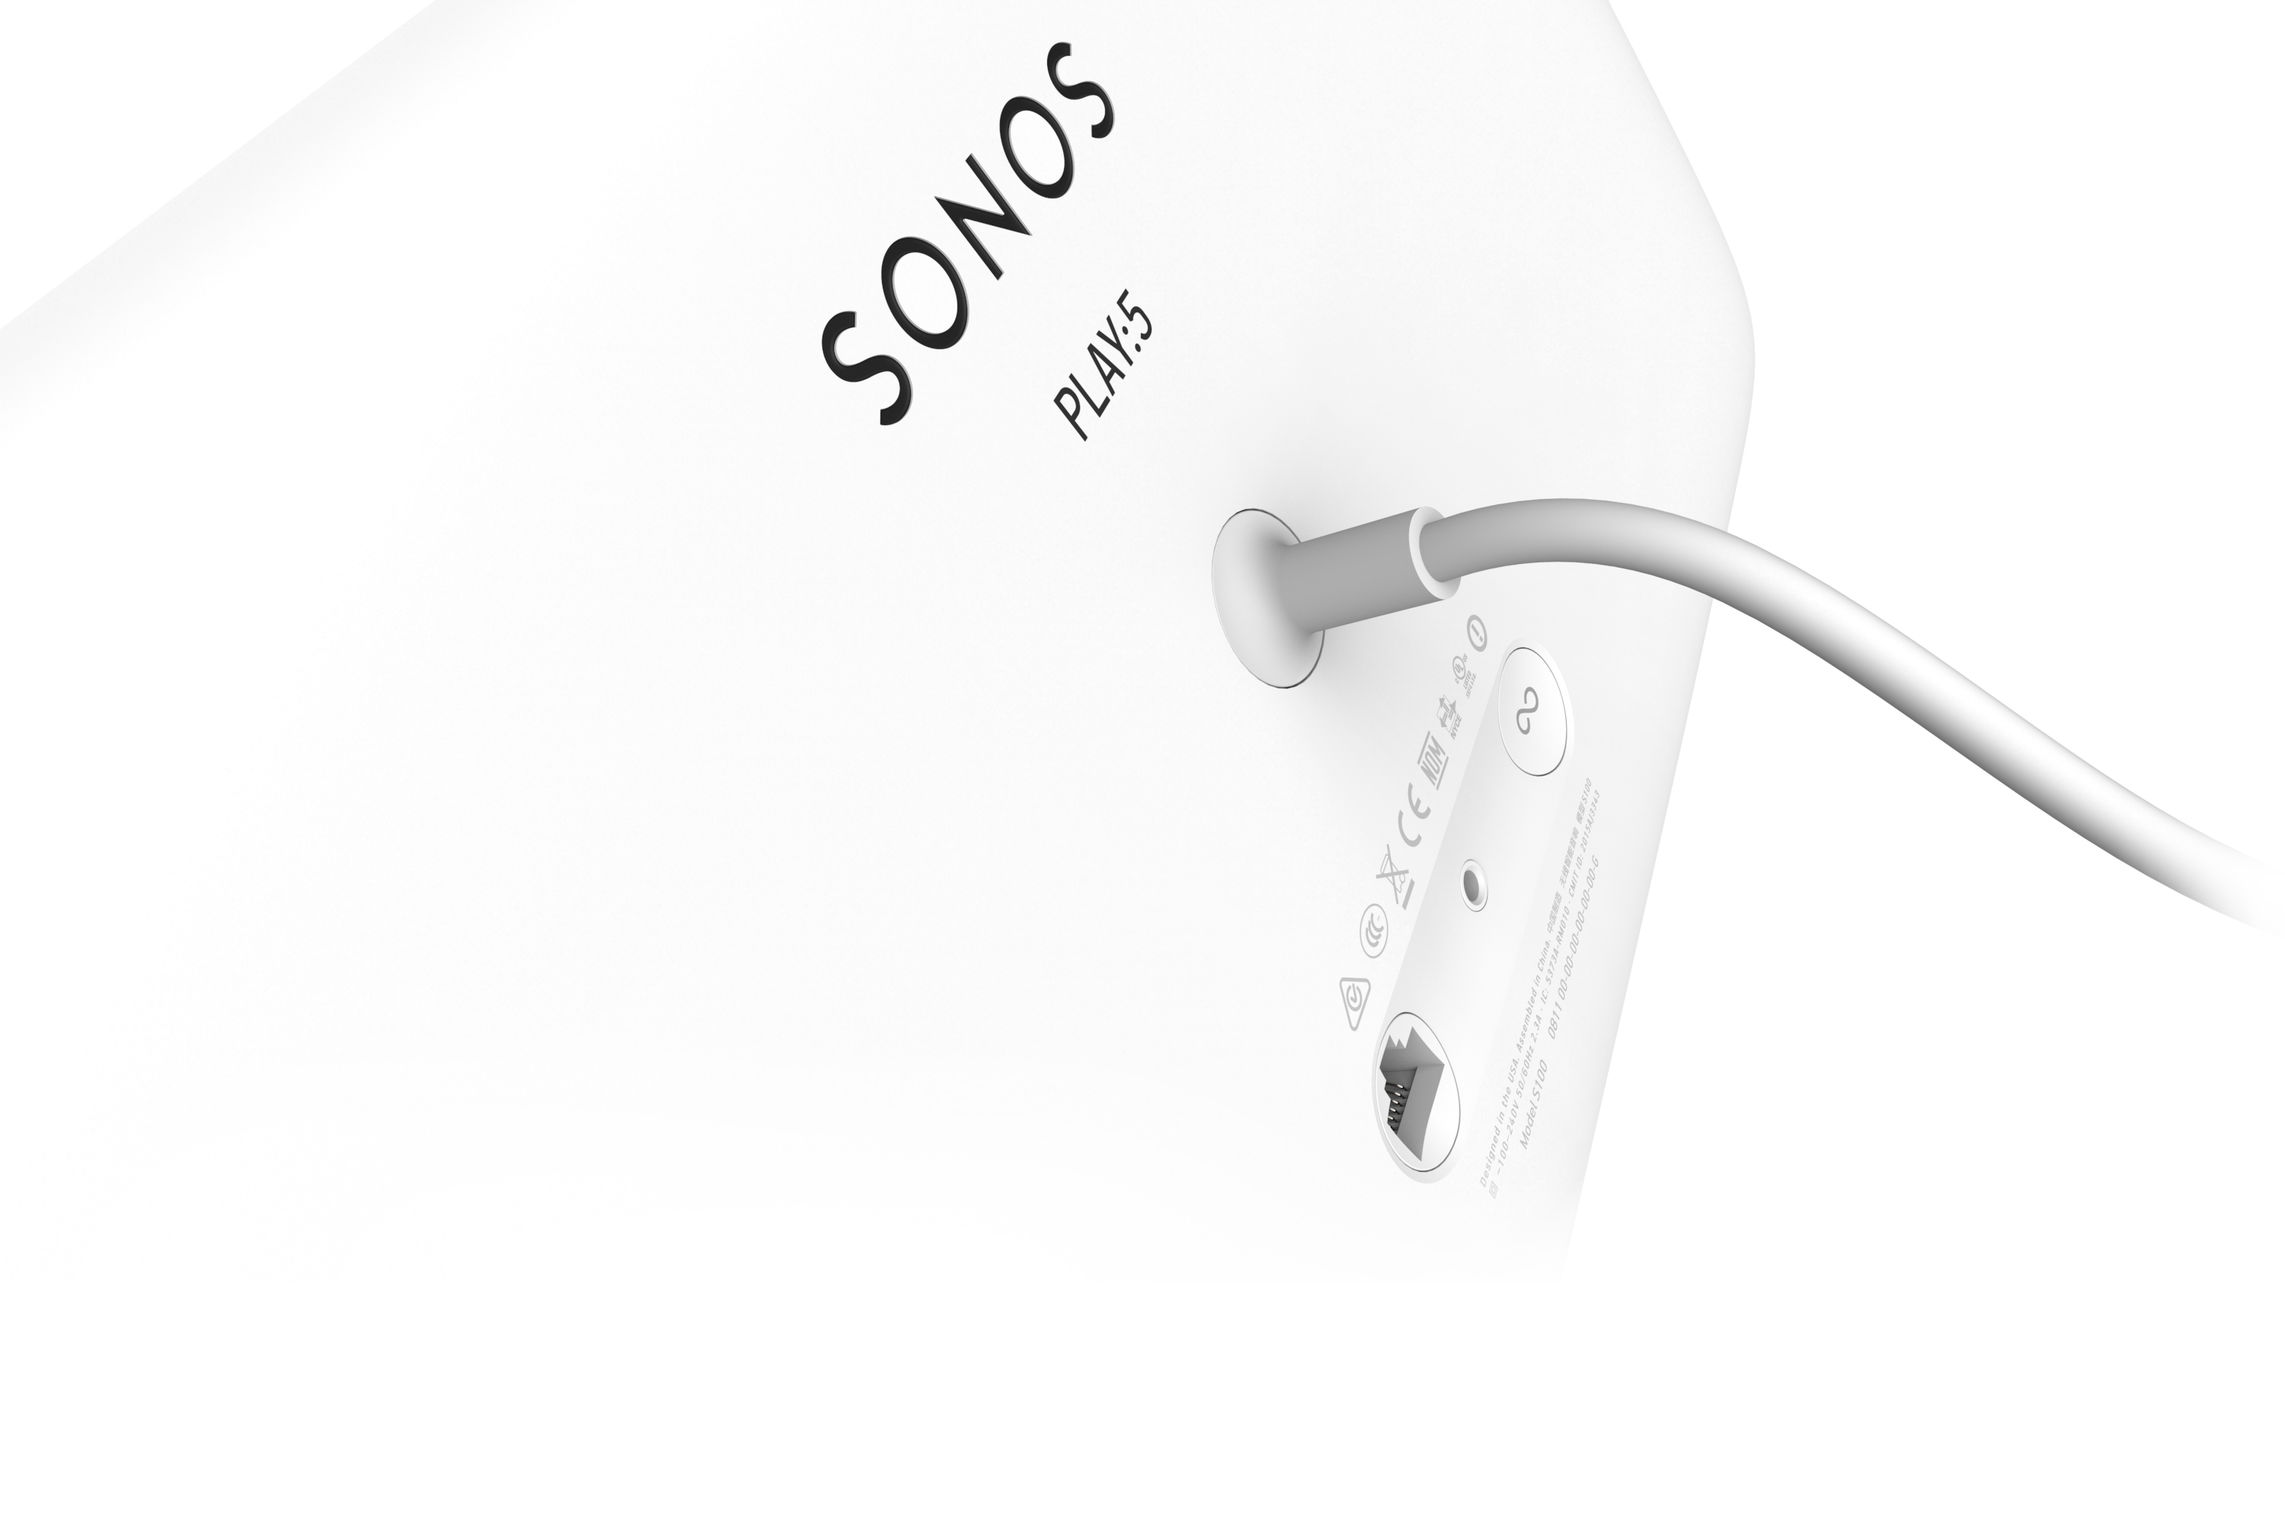 The all-new Sonos PLAY:5